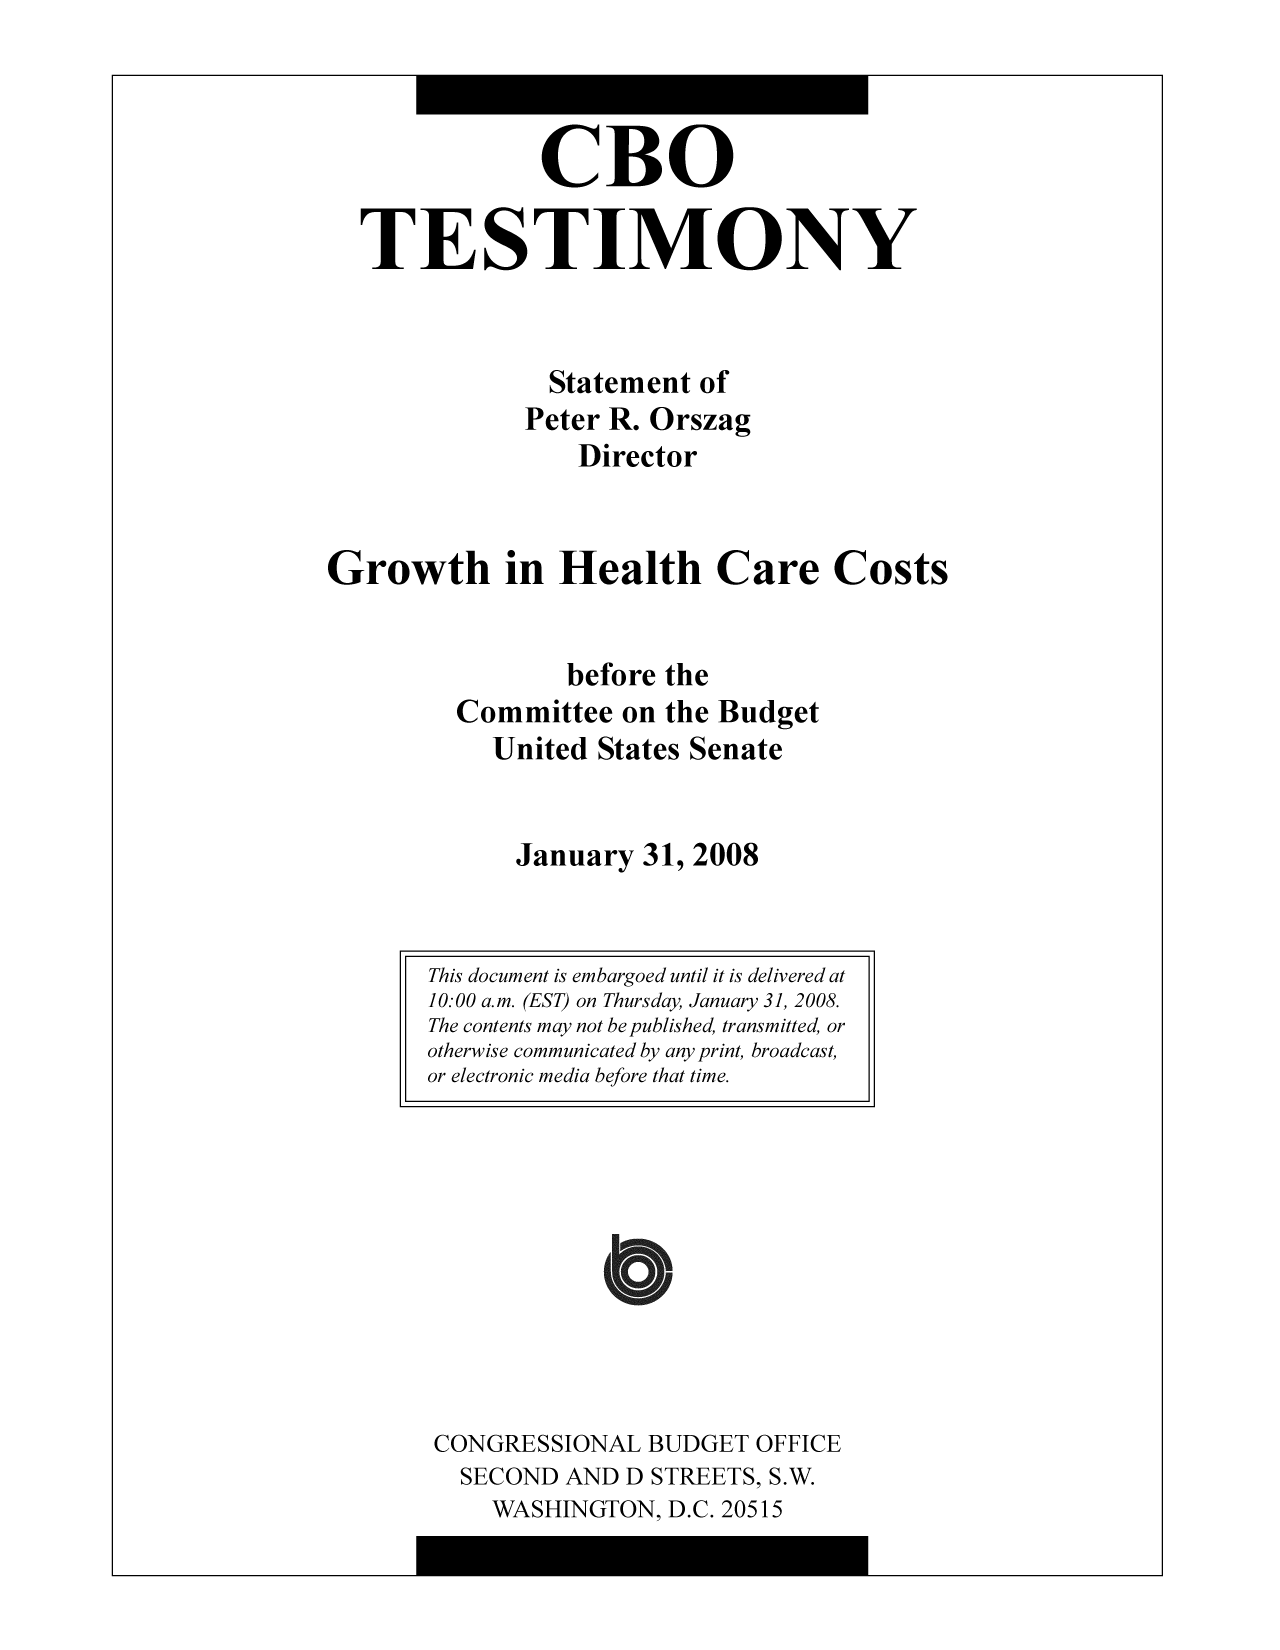 handle is hein.congrec/cbo9344 and id is 1 raw text is: CBO
TESTIMONY
Statement of
Peter R. Orszag
Director
Growth in Health Care Costs
before the
Committee on the Budget
United States Senate
January 31, 2008

CONGRESSIONAL BUDGET OFFICE
SECOND AND D STREETS, S.W.
WASHINGTON, D.C. 20515

This document is embargoed until it is delivered at
10:00 a.m. (EST) on Thursday, January 31, 2008.
The contents may not bepublished, transmitted, or
otherwise communicated by any print, broadcast,
or electronic media before that time.

I


